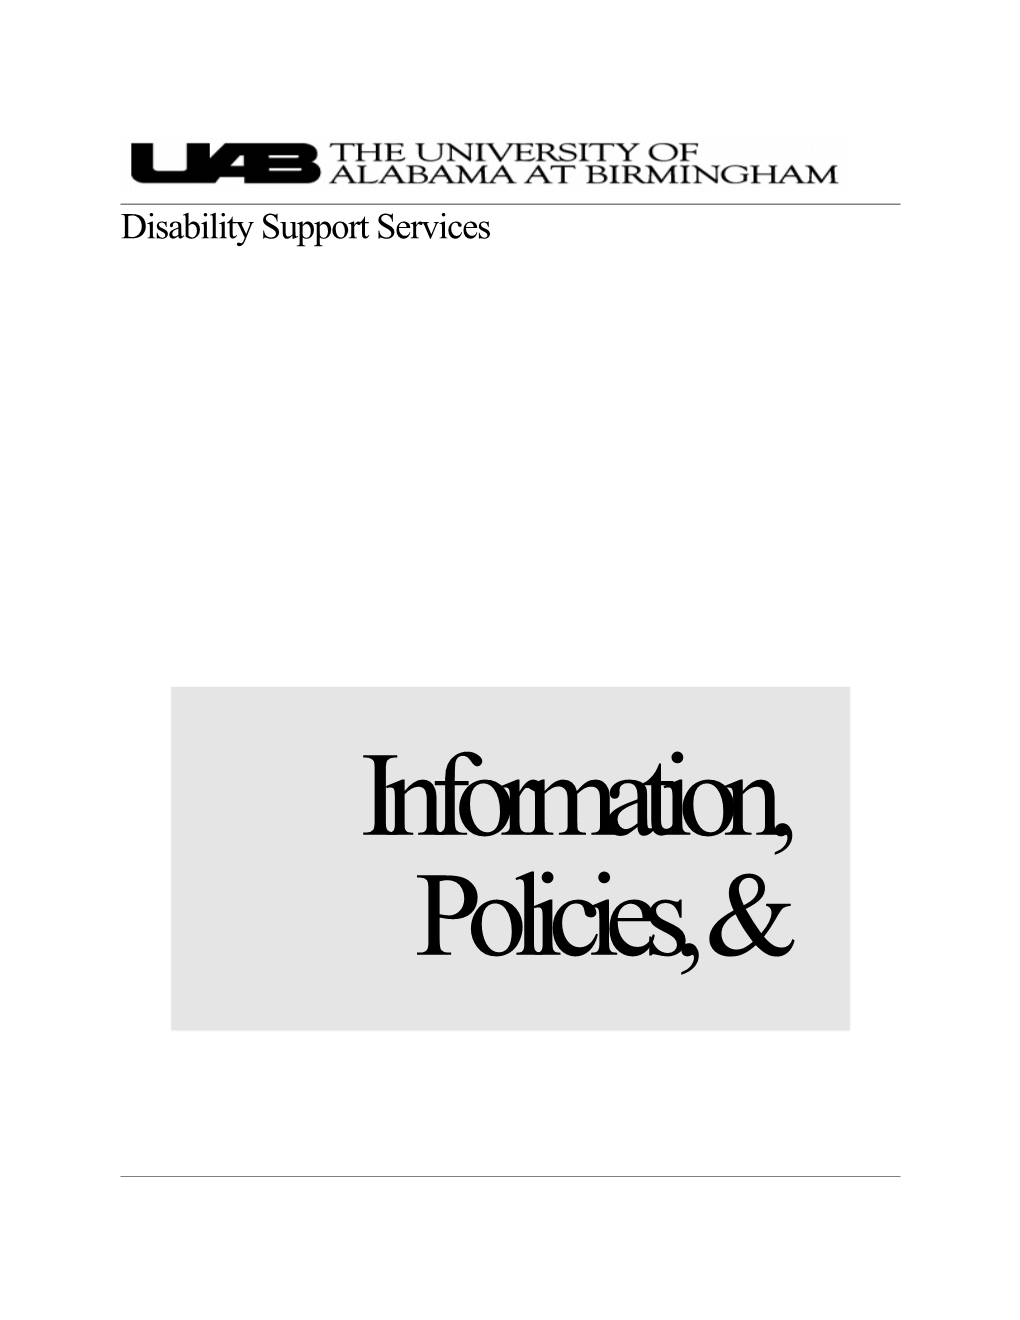 Information, Policies, & Procedures for Faculty & Staff